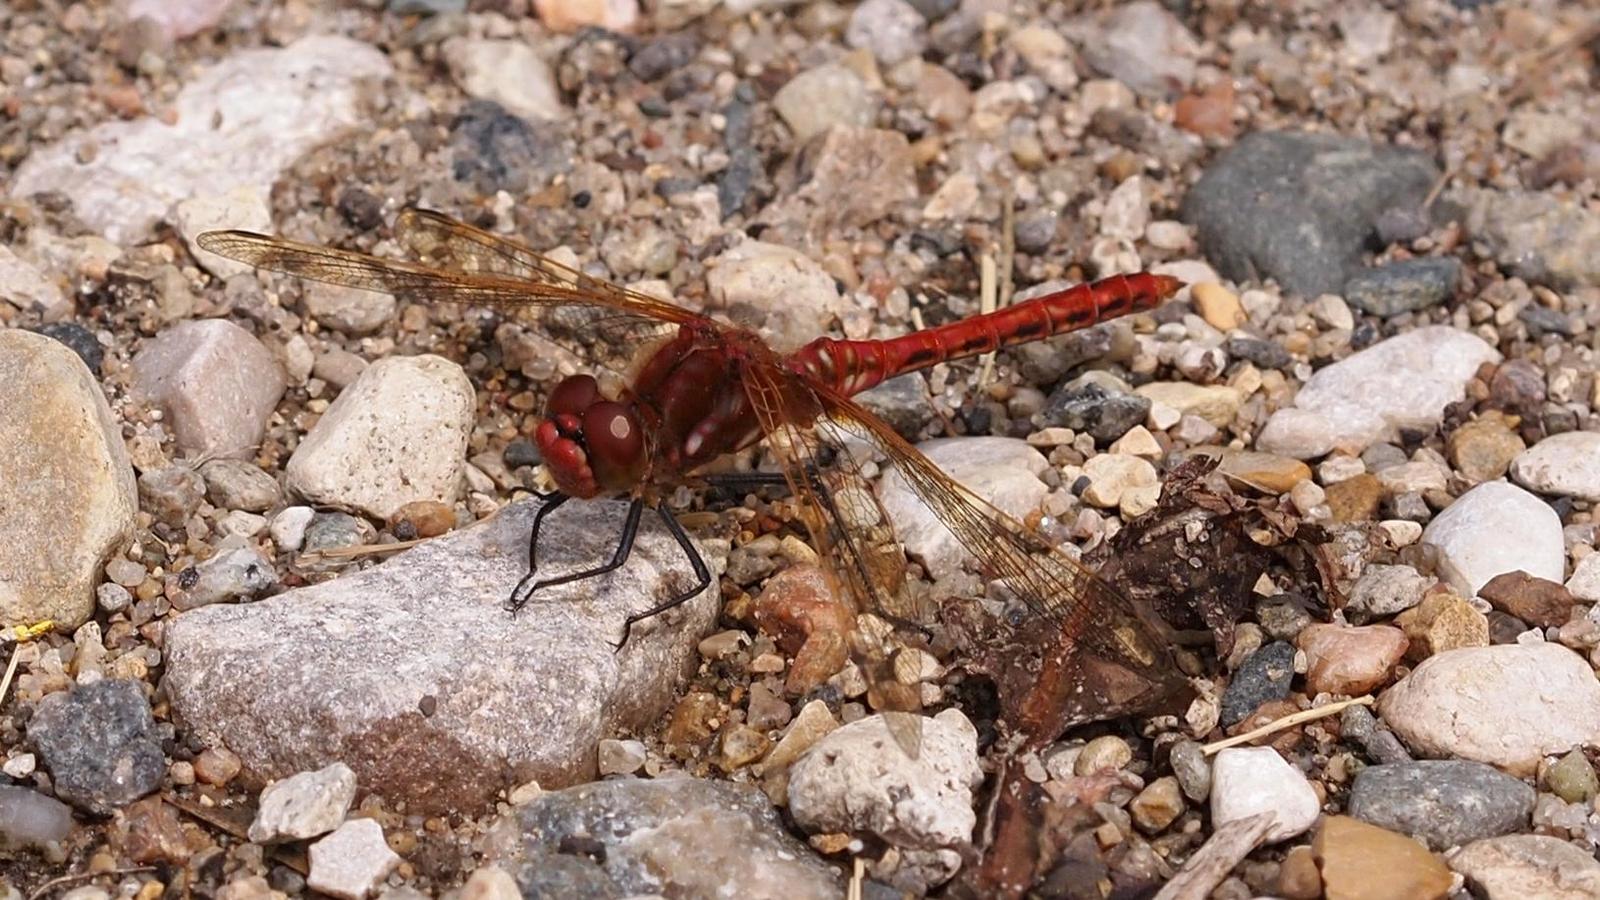 Red-veined Meadowhawk Photo by Scott King